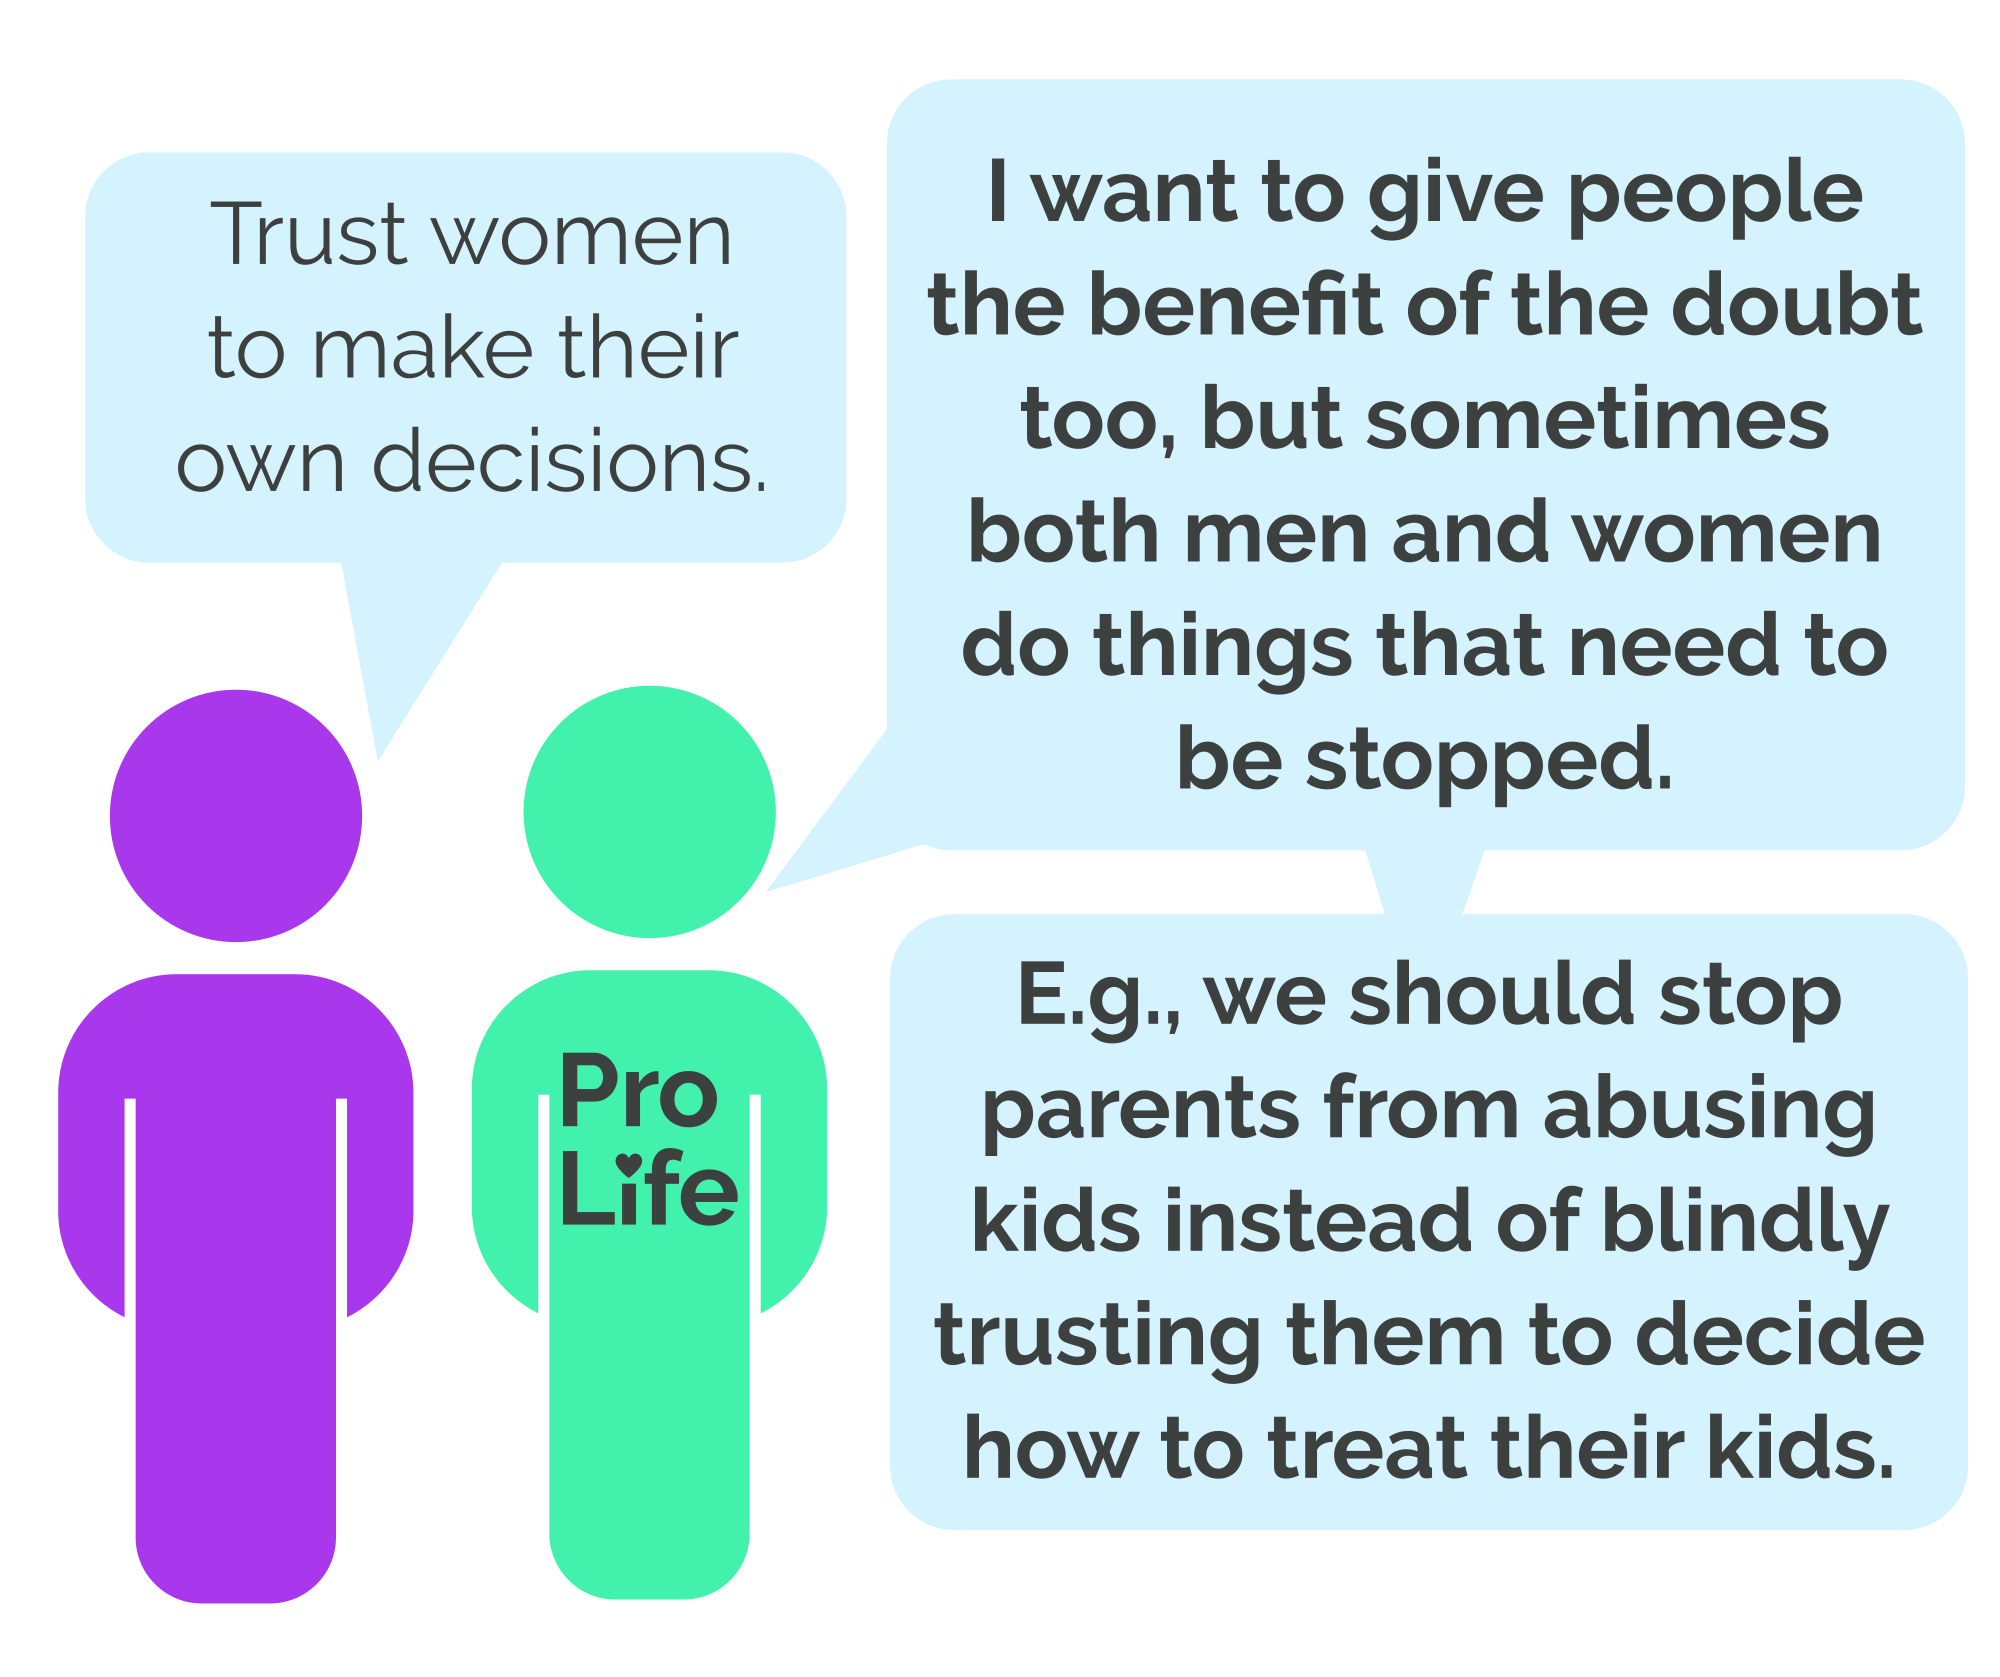 Person 1: Trust women to make their own decisions. Person 2 (our hero): I want to give people the benefit of the doubt too, but sometimes both men and women do things that need to be stopped. E.g., we should stop parents from abusing kids instead of blindly trusting them to decide how to treat their kids.